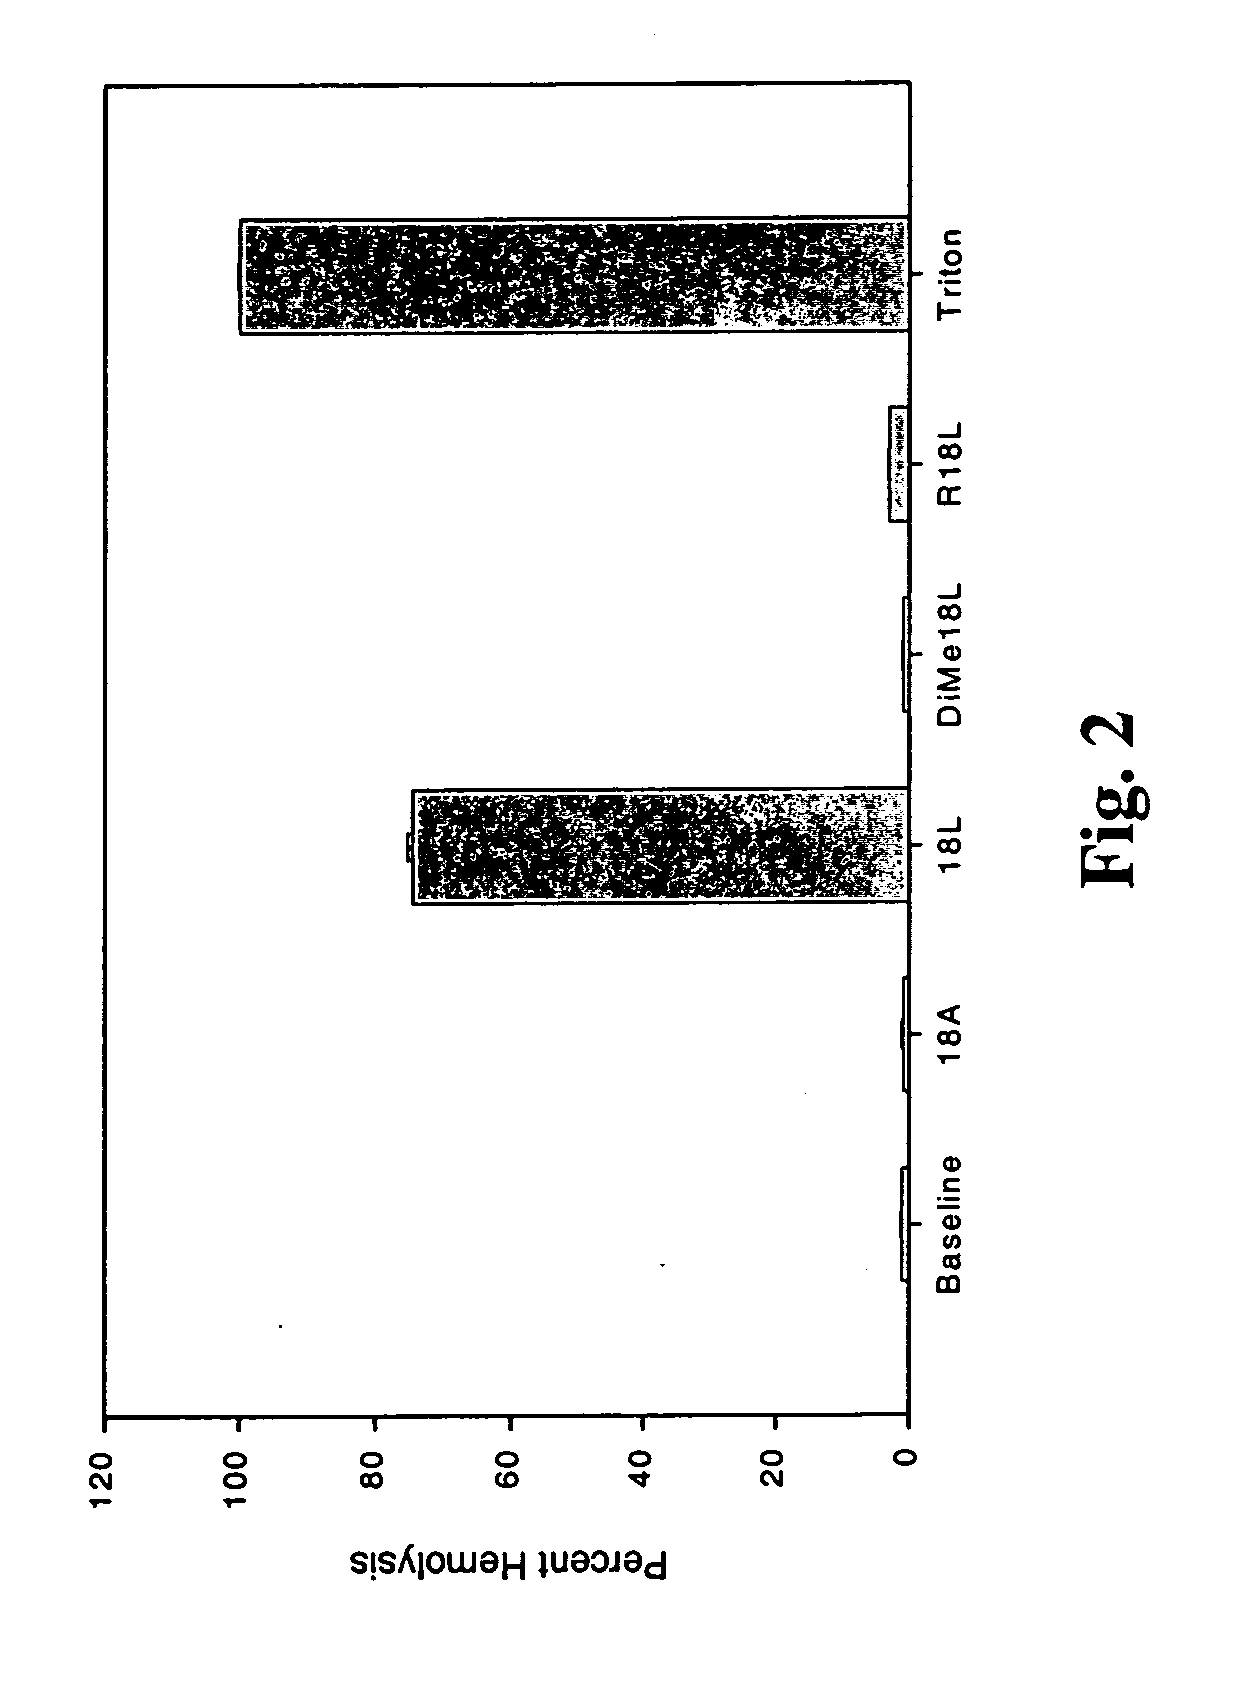 Synthetic single domain polypeptides mimicking apolipoprotein E and methods of use